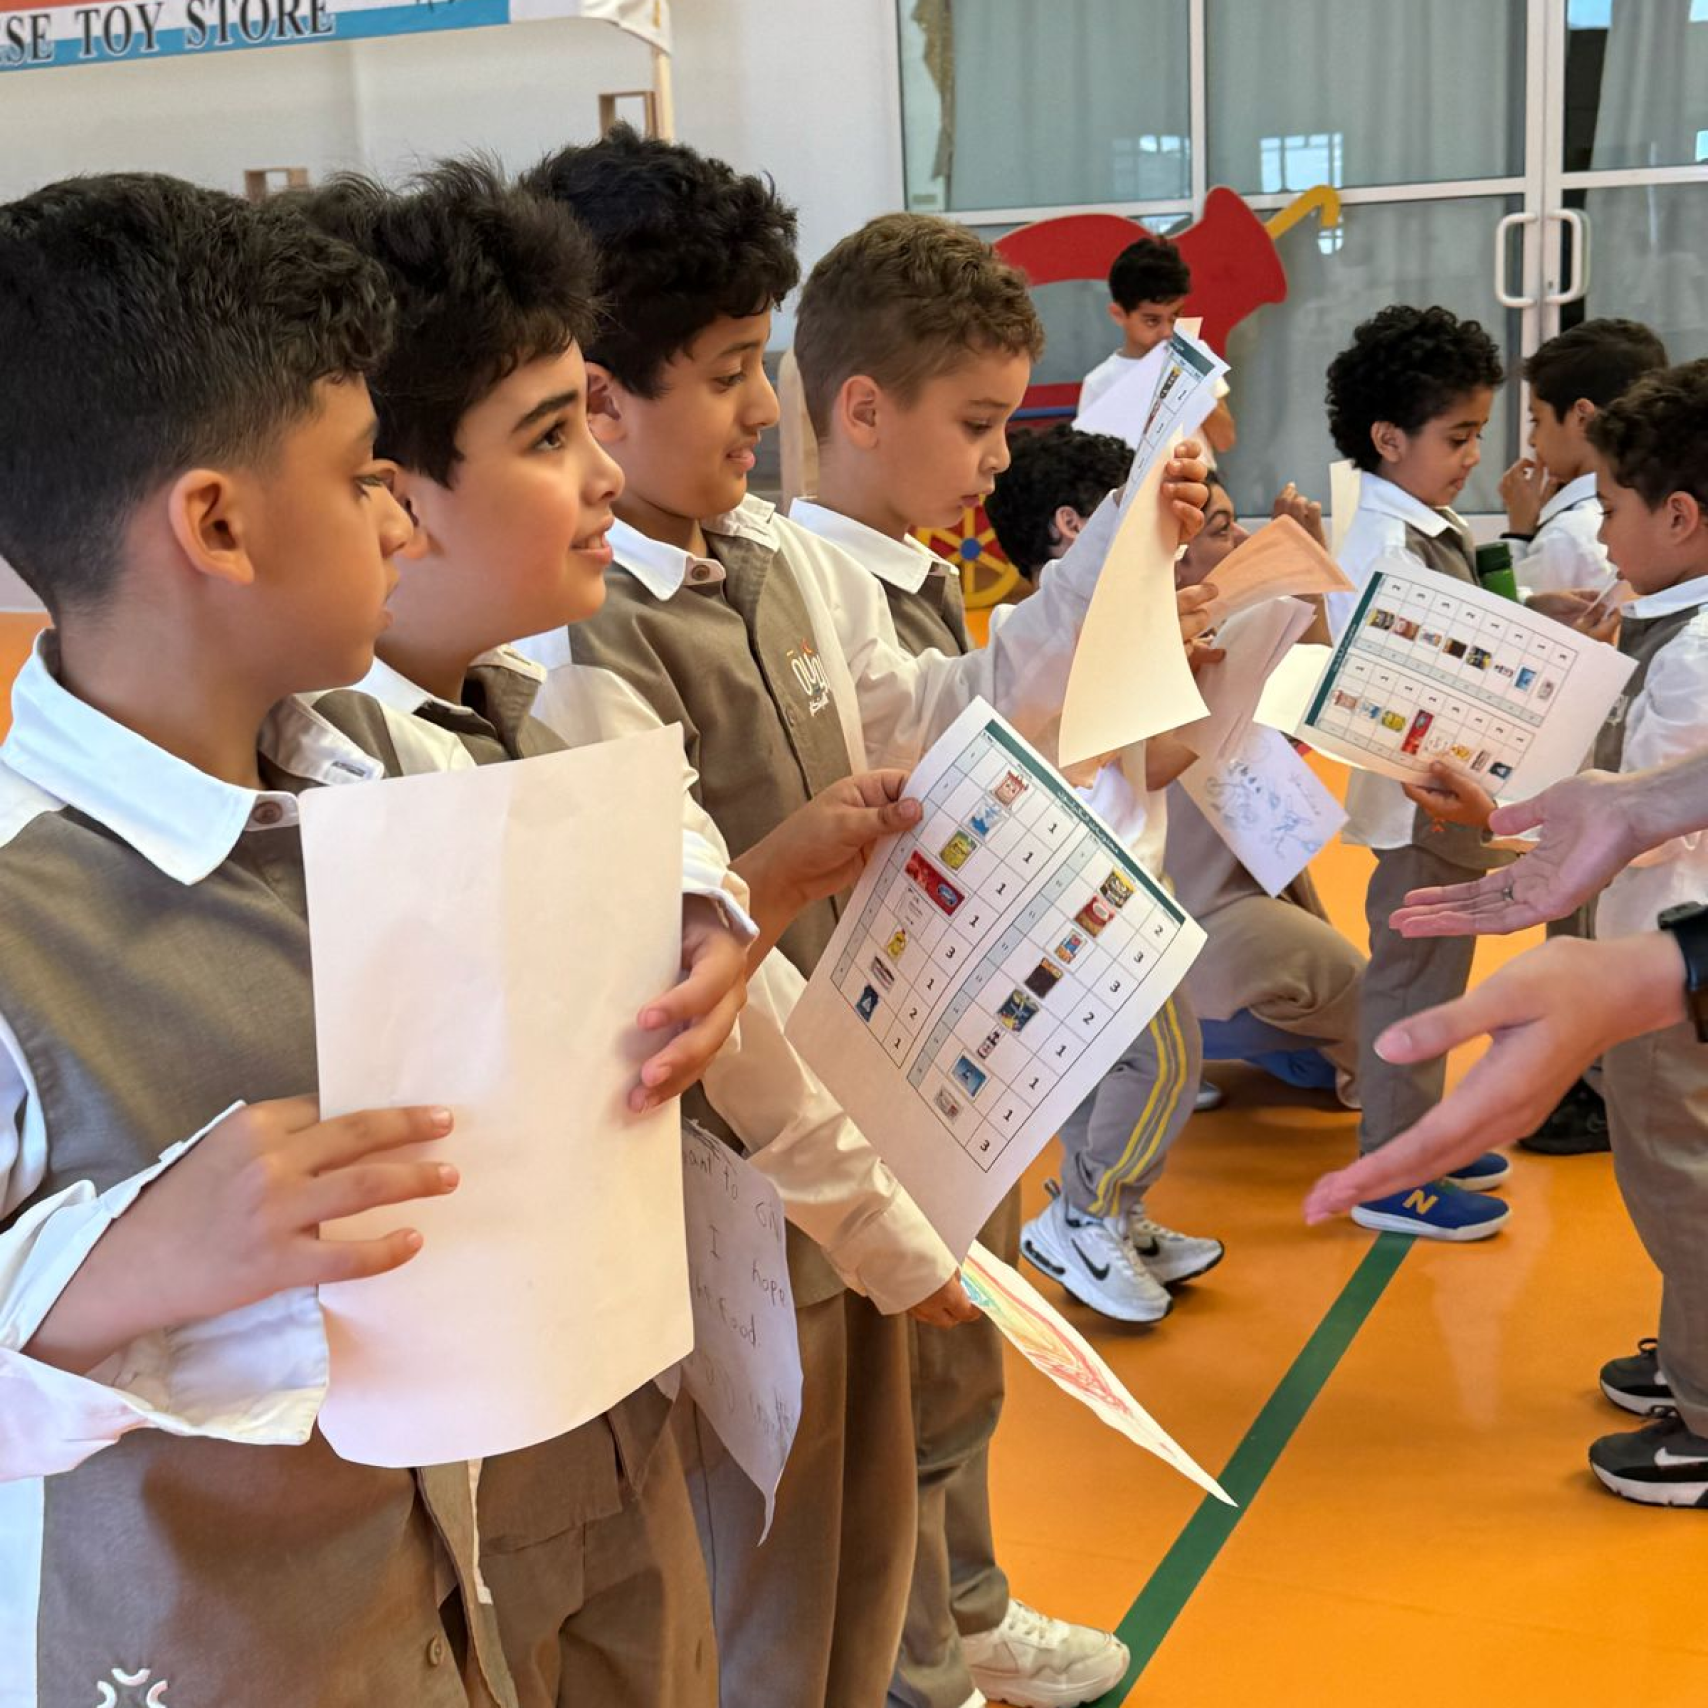 A group of young boys are standing in a line holding papers